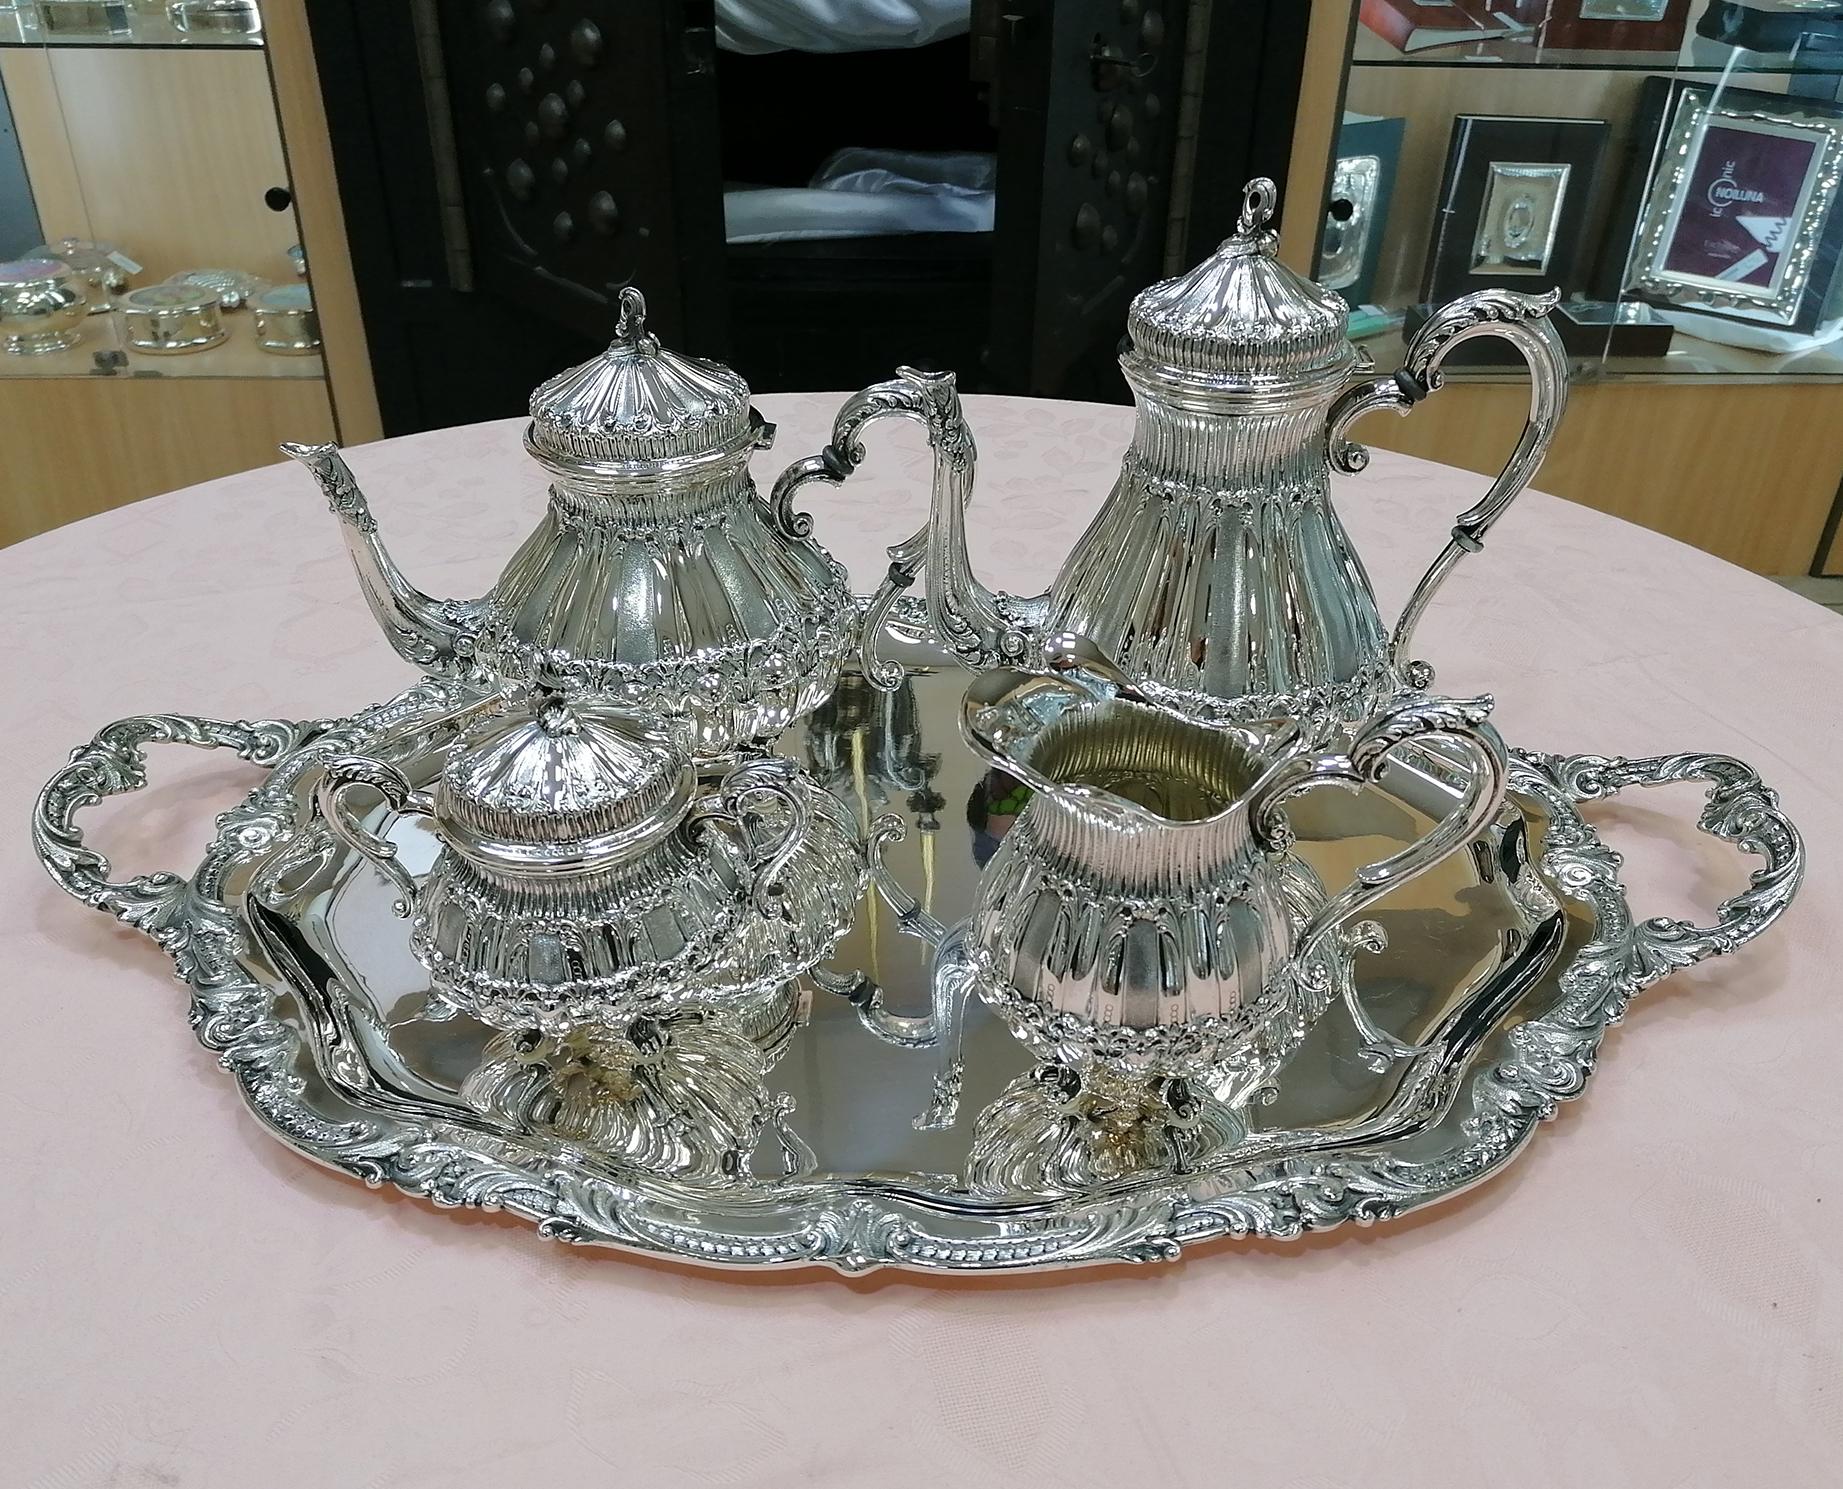 Italian tea and coffee service and tray made entirely by hand in the 40s of the 20th century. 
The service is round and each piece has 4 cast feet for support. 
The body is embossed and chiseled into 